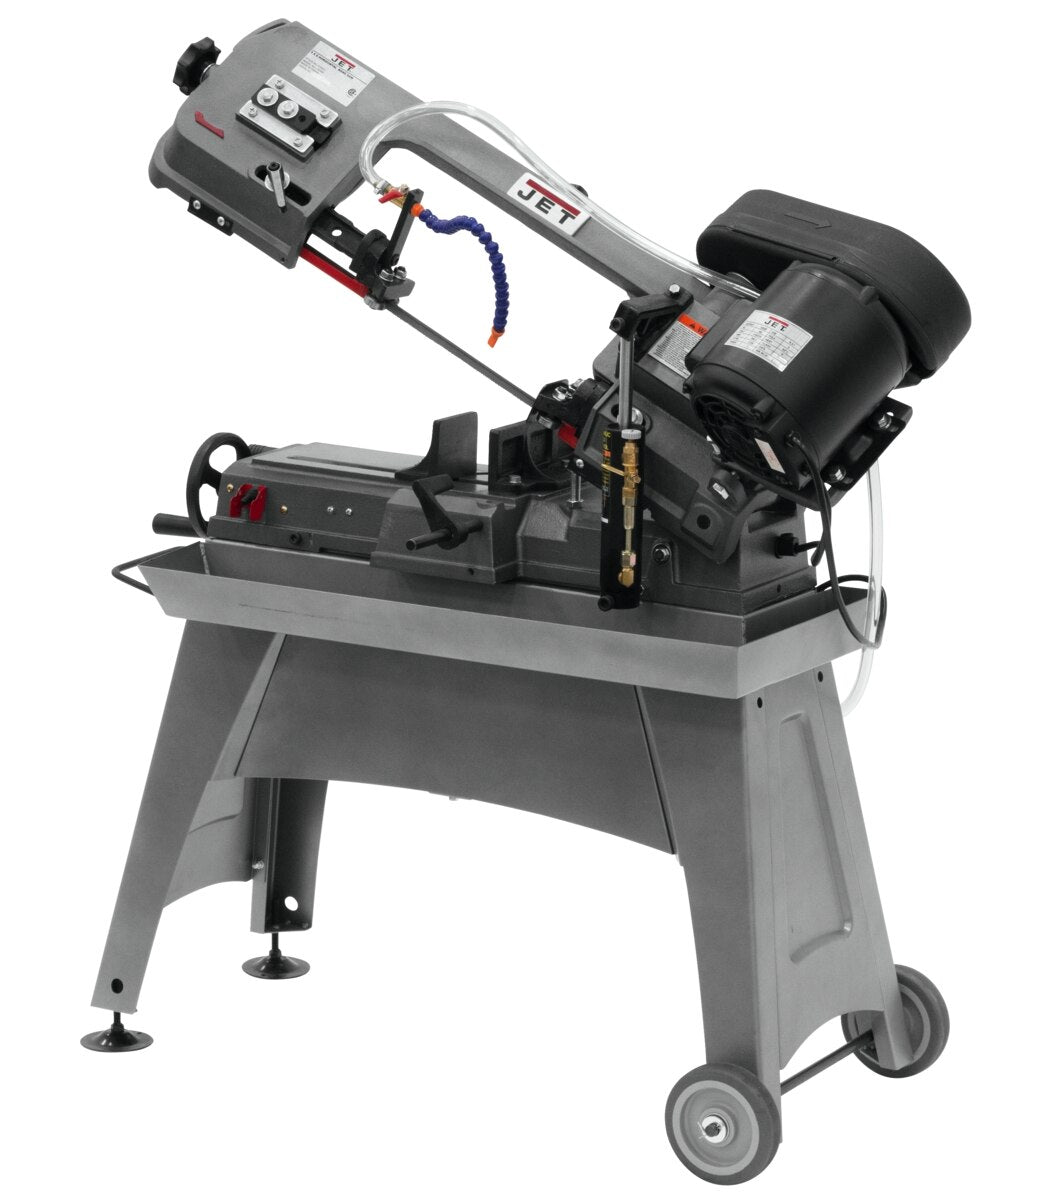 J-3230, 5" x 8" Horizontal Bandsaw with Coolant